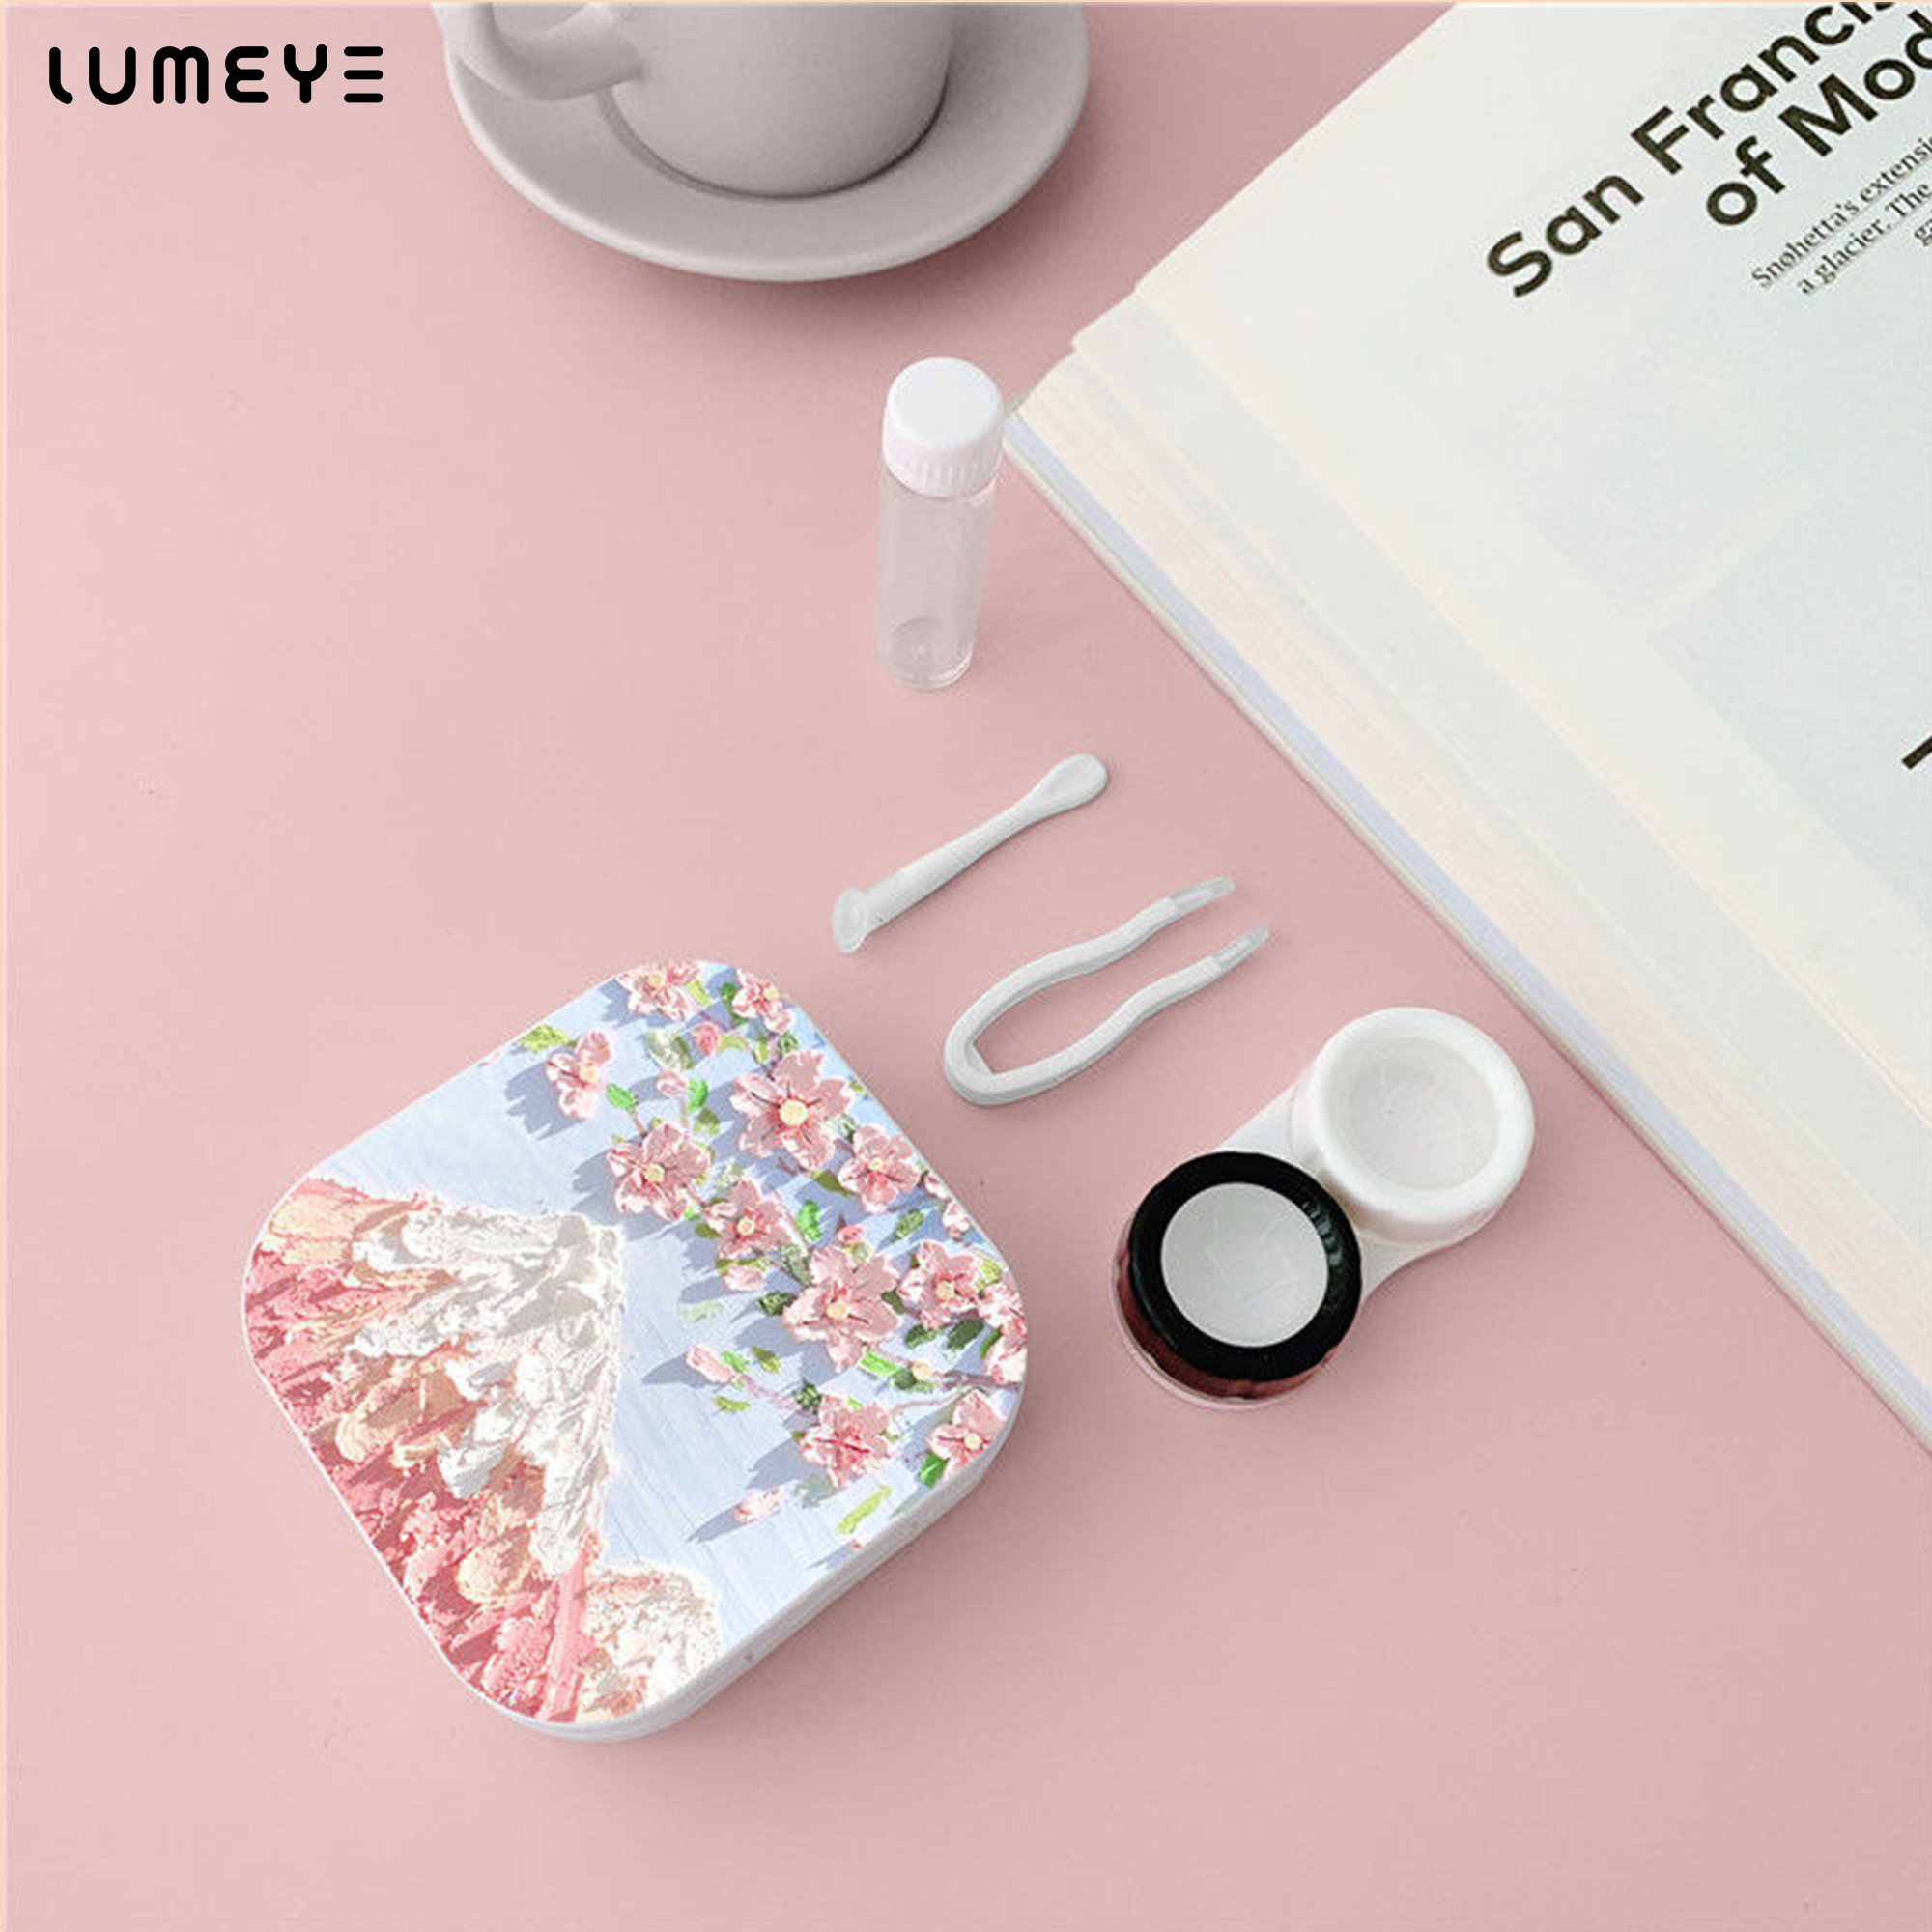 Best COLORED CONTACTS - LUMEYE Pinky Fujisan Blossom Lens Case - LUMEYE